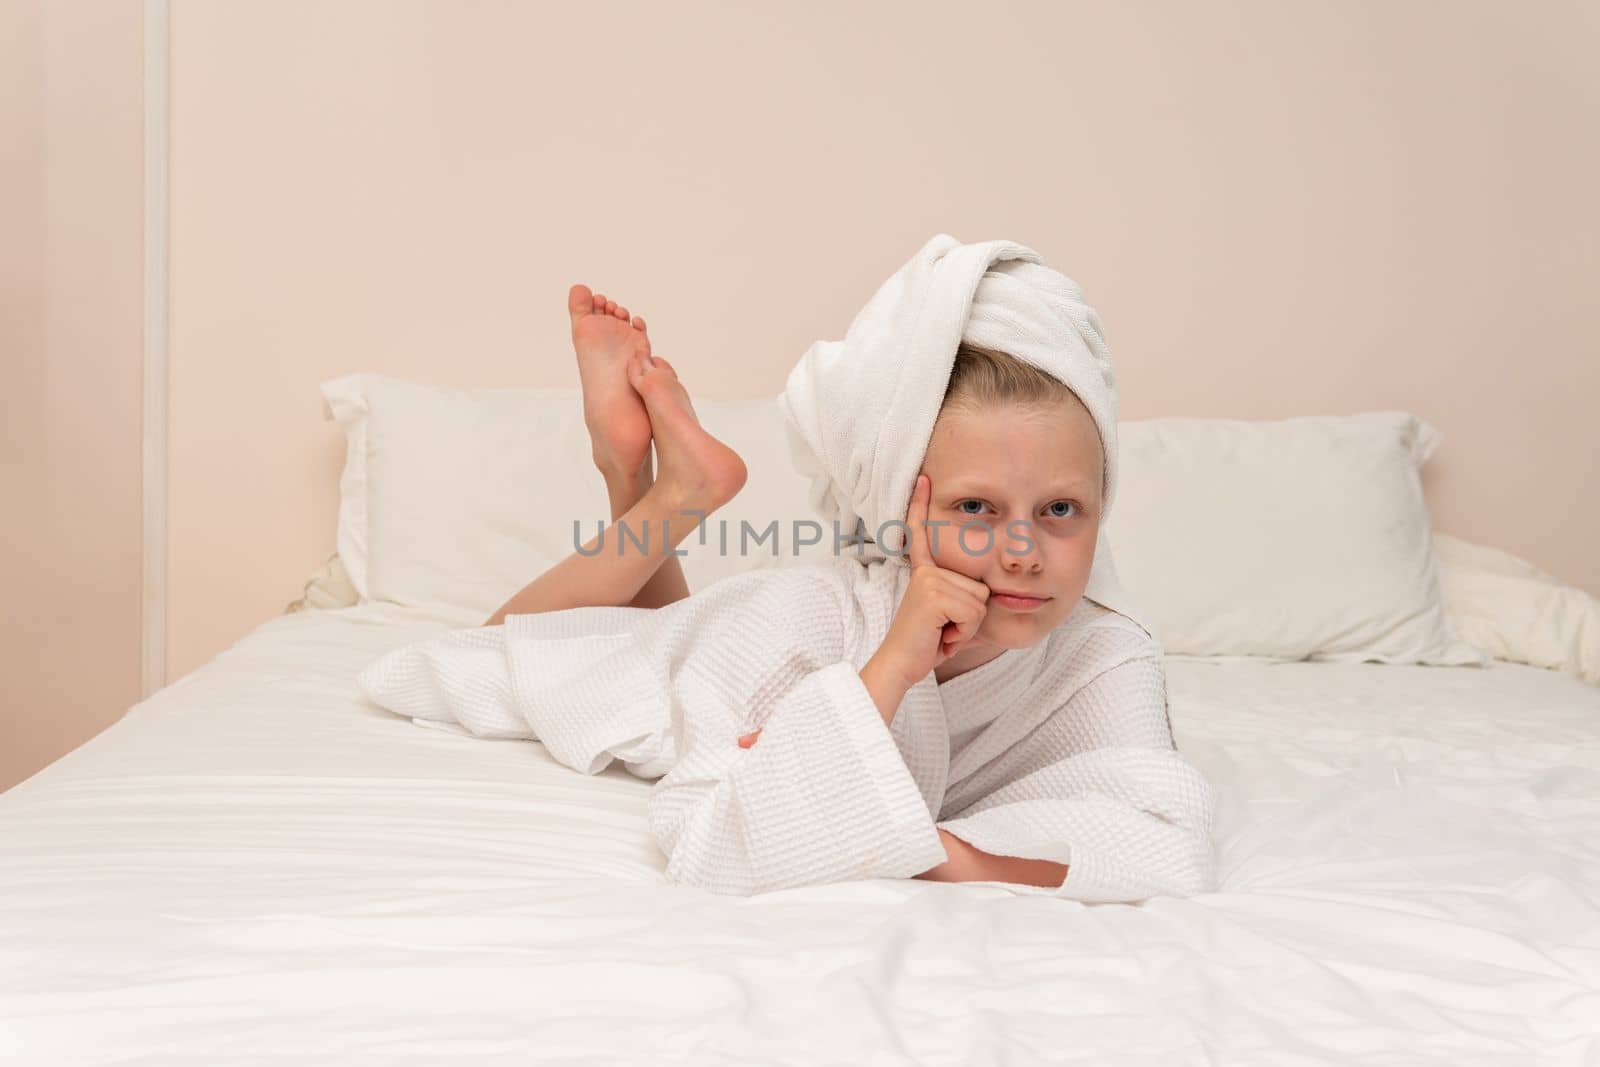 Smiling smile Creek elbows coffee thinks copyspace bathrobe white cute, for morning dressing from pretty for beauty person, little baby. Care health fashion, by 89167702191